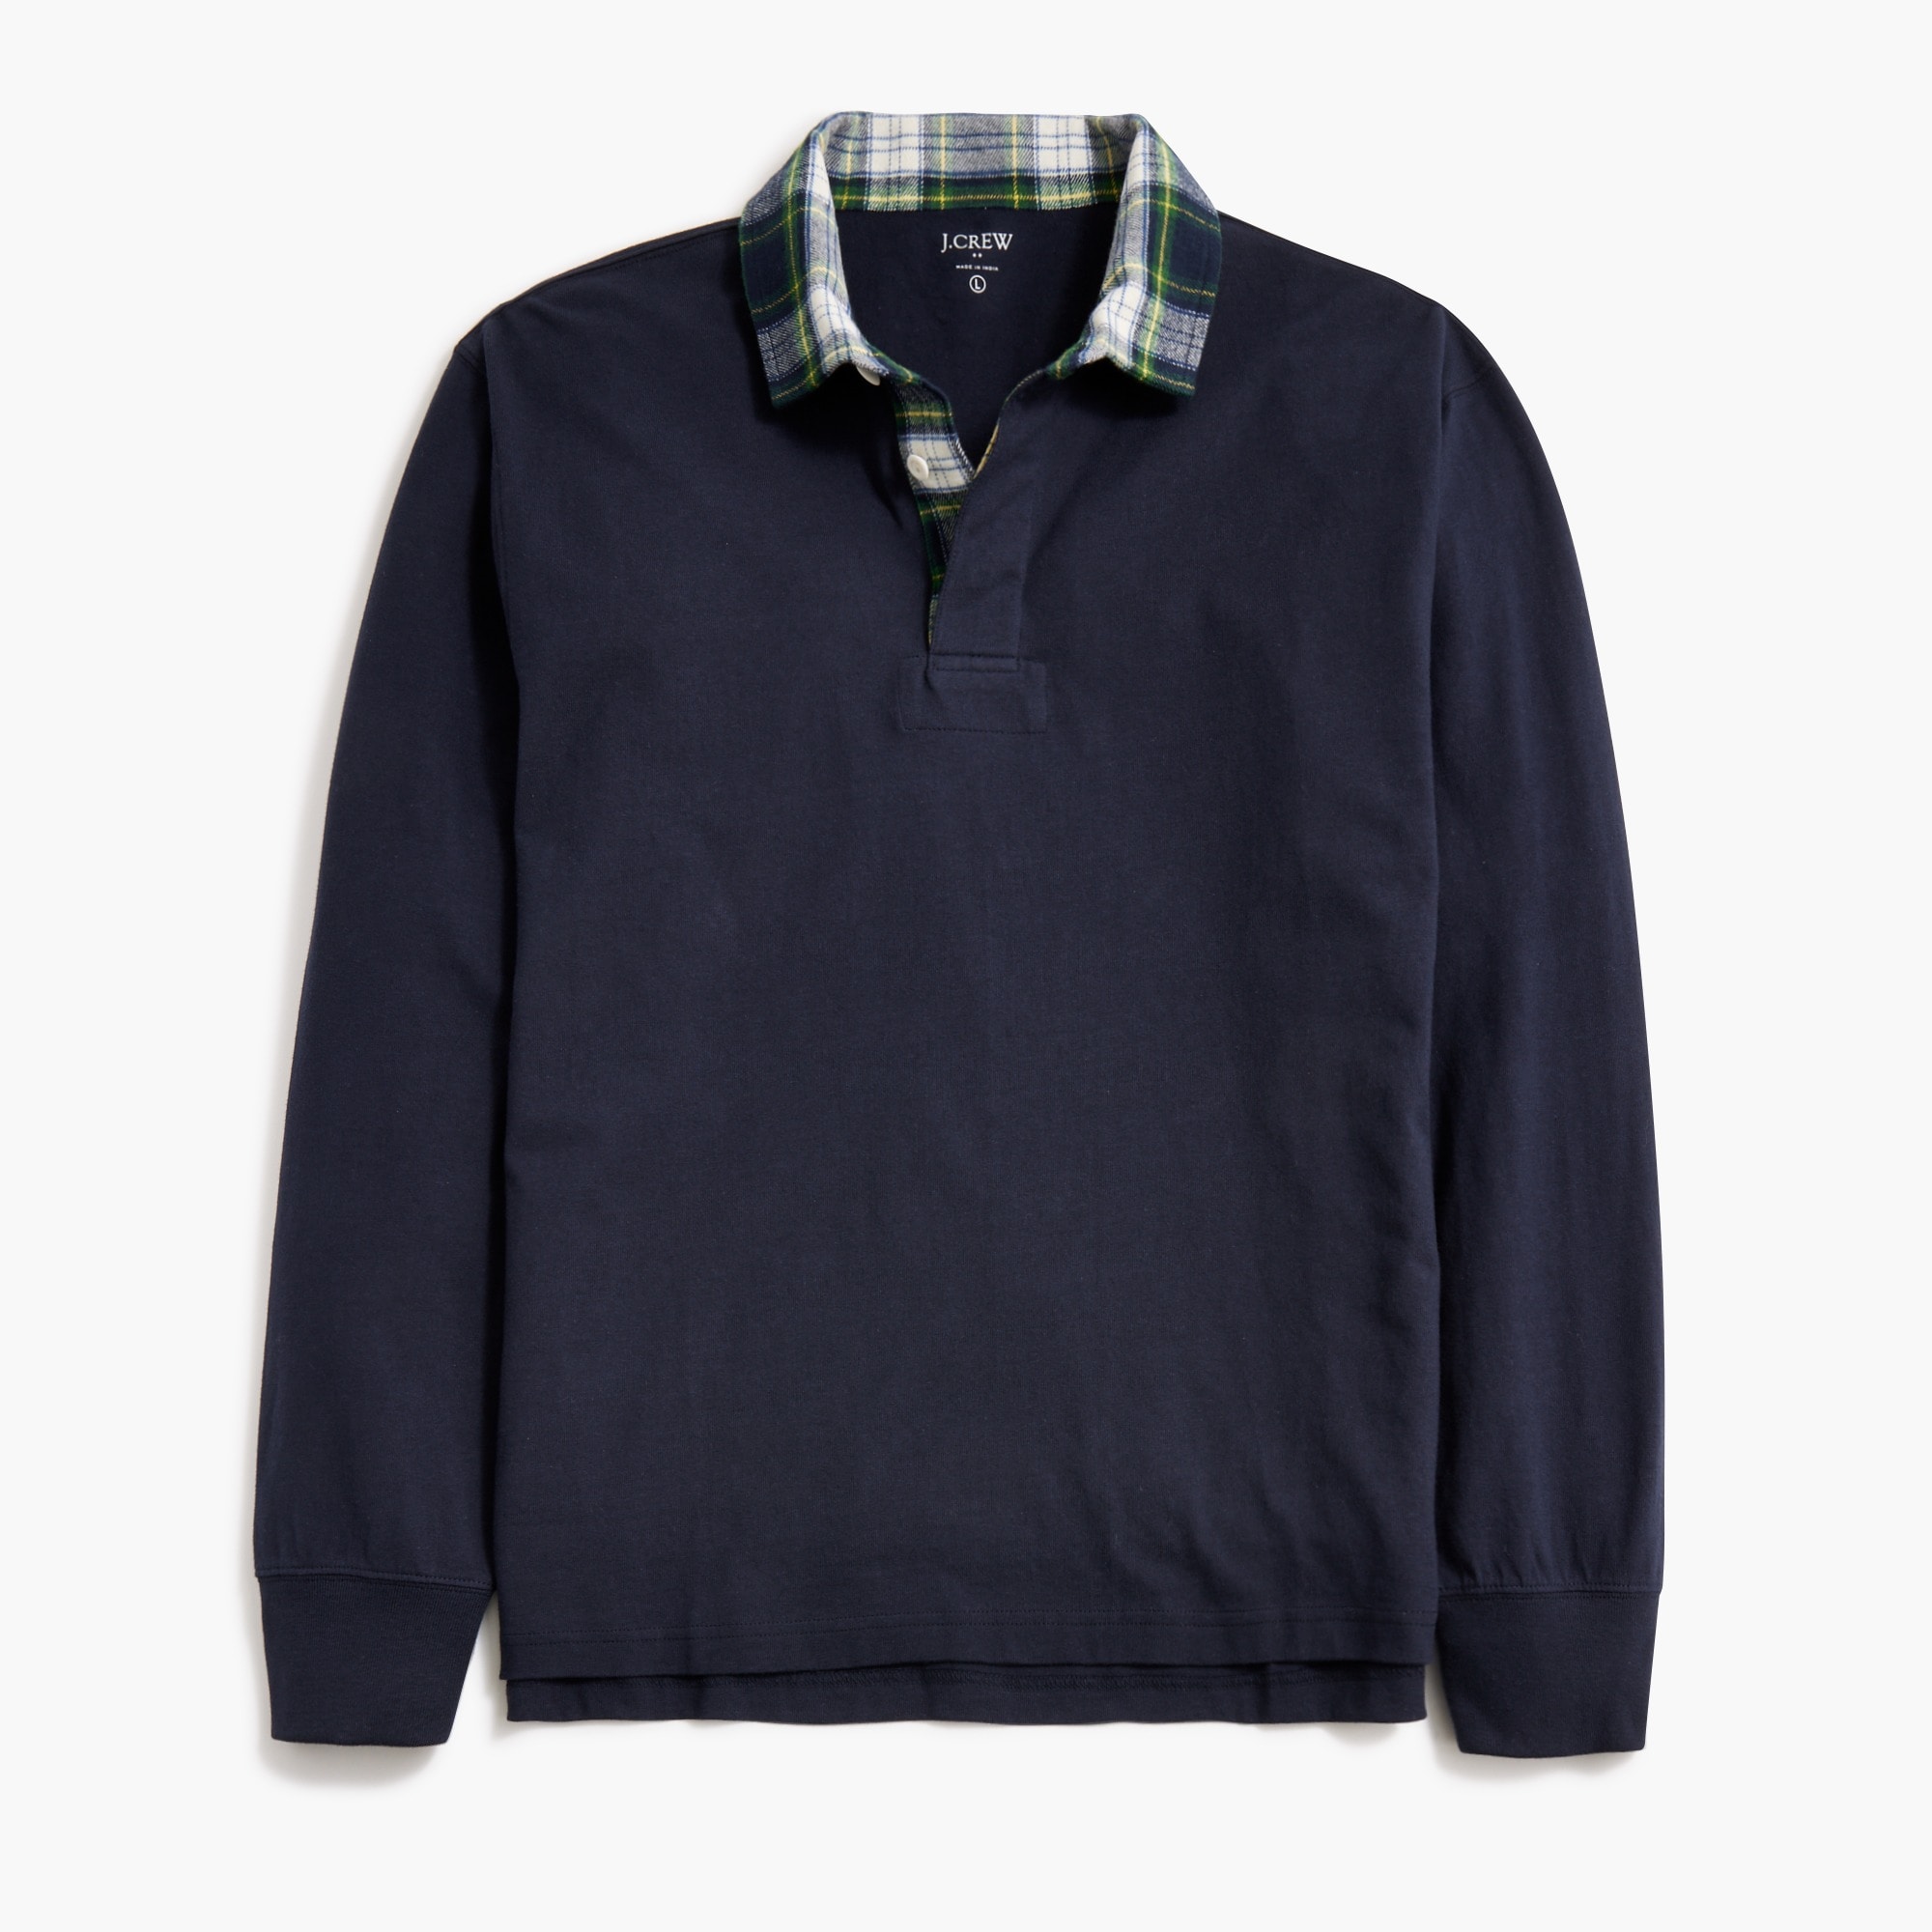  Rugby shirt with flannel collar